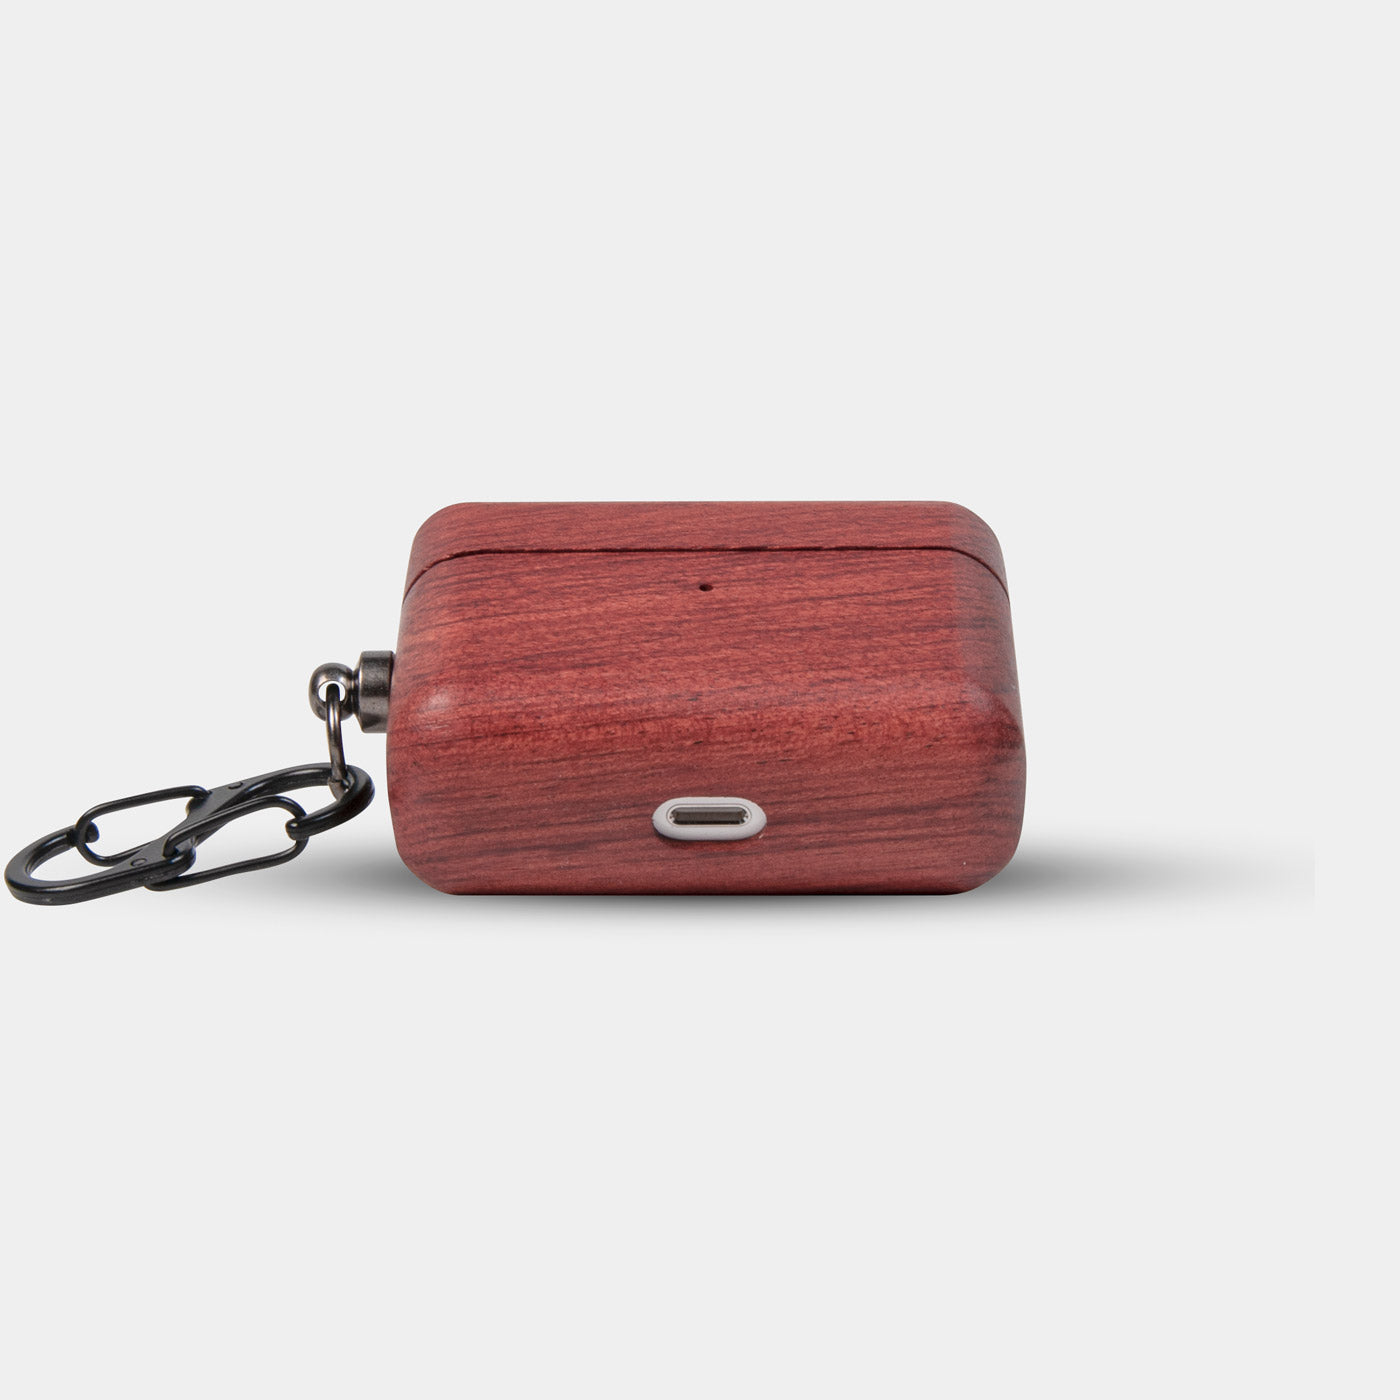 Best Custom Mahogany Wood AirPods Pro Case Covers - Engraved In Nature